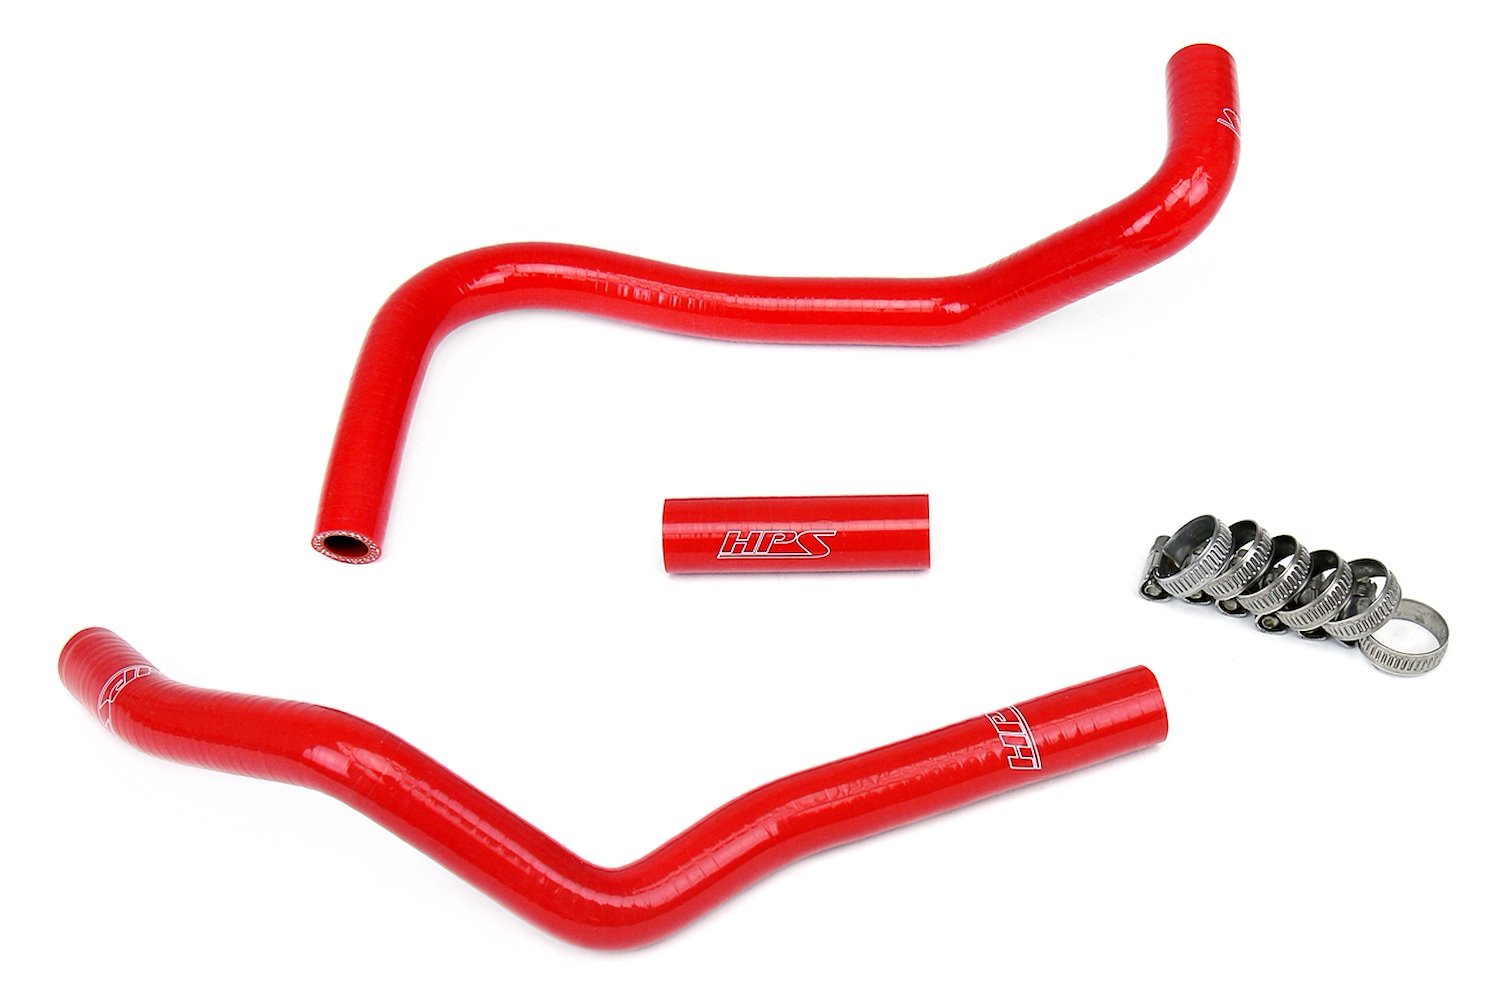 57-1282-RED Heater Hose Kit, High-Temp 3-Ply Reinforced Silicone, Replace OEM Rubber Heater Coolant Hoses